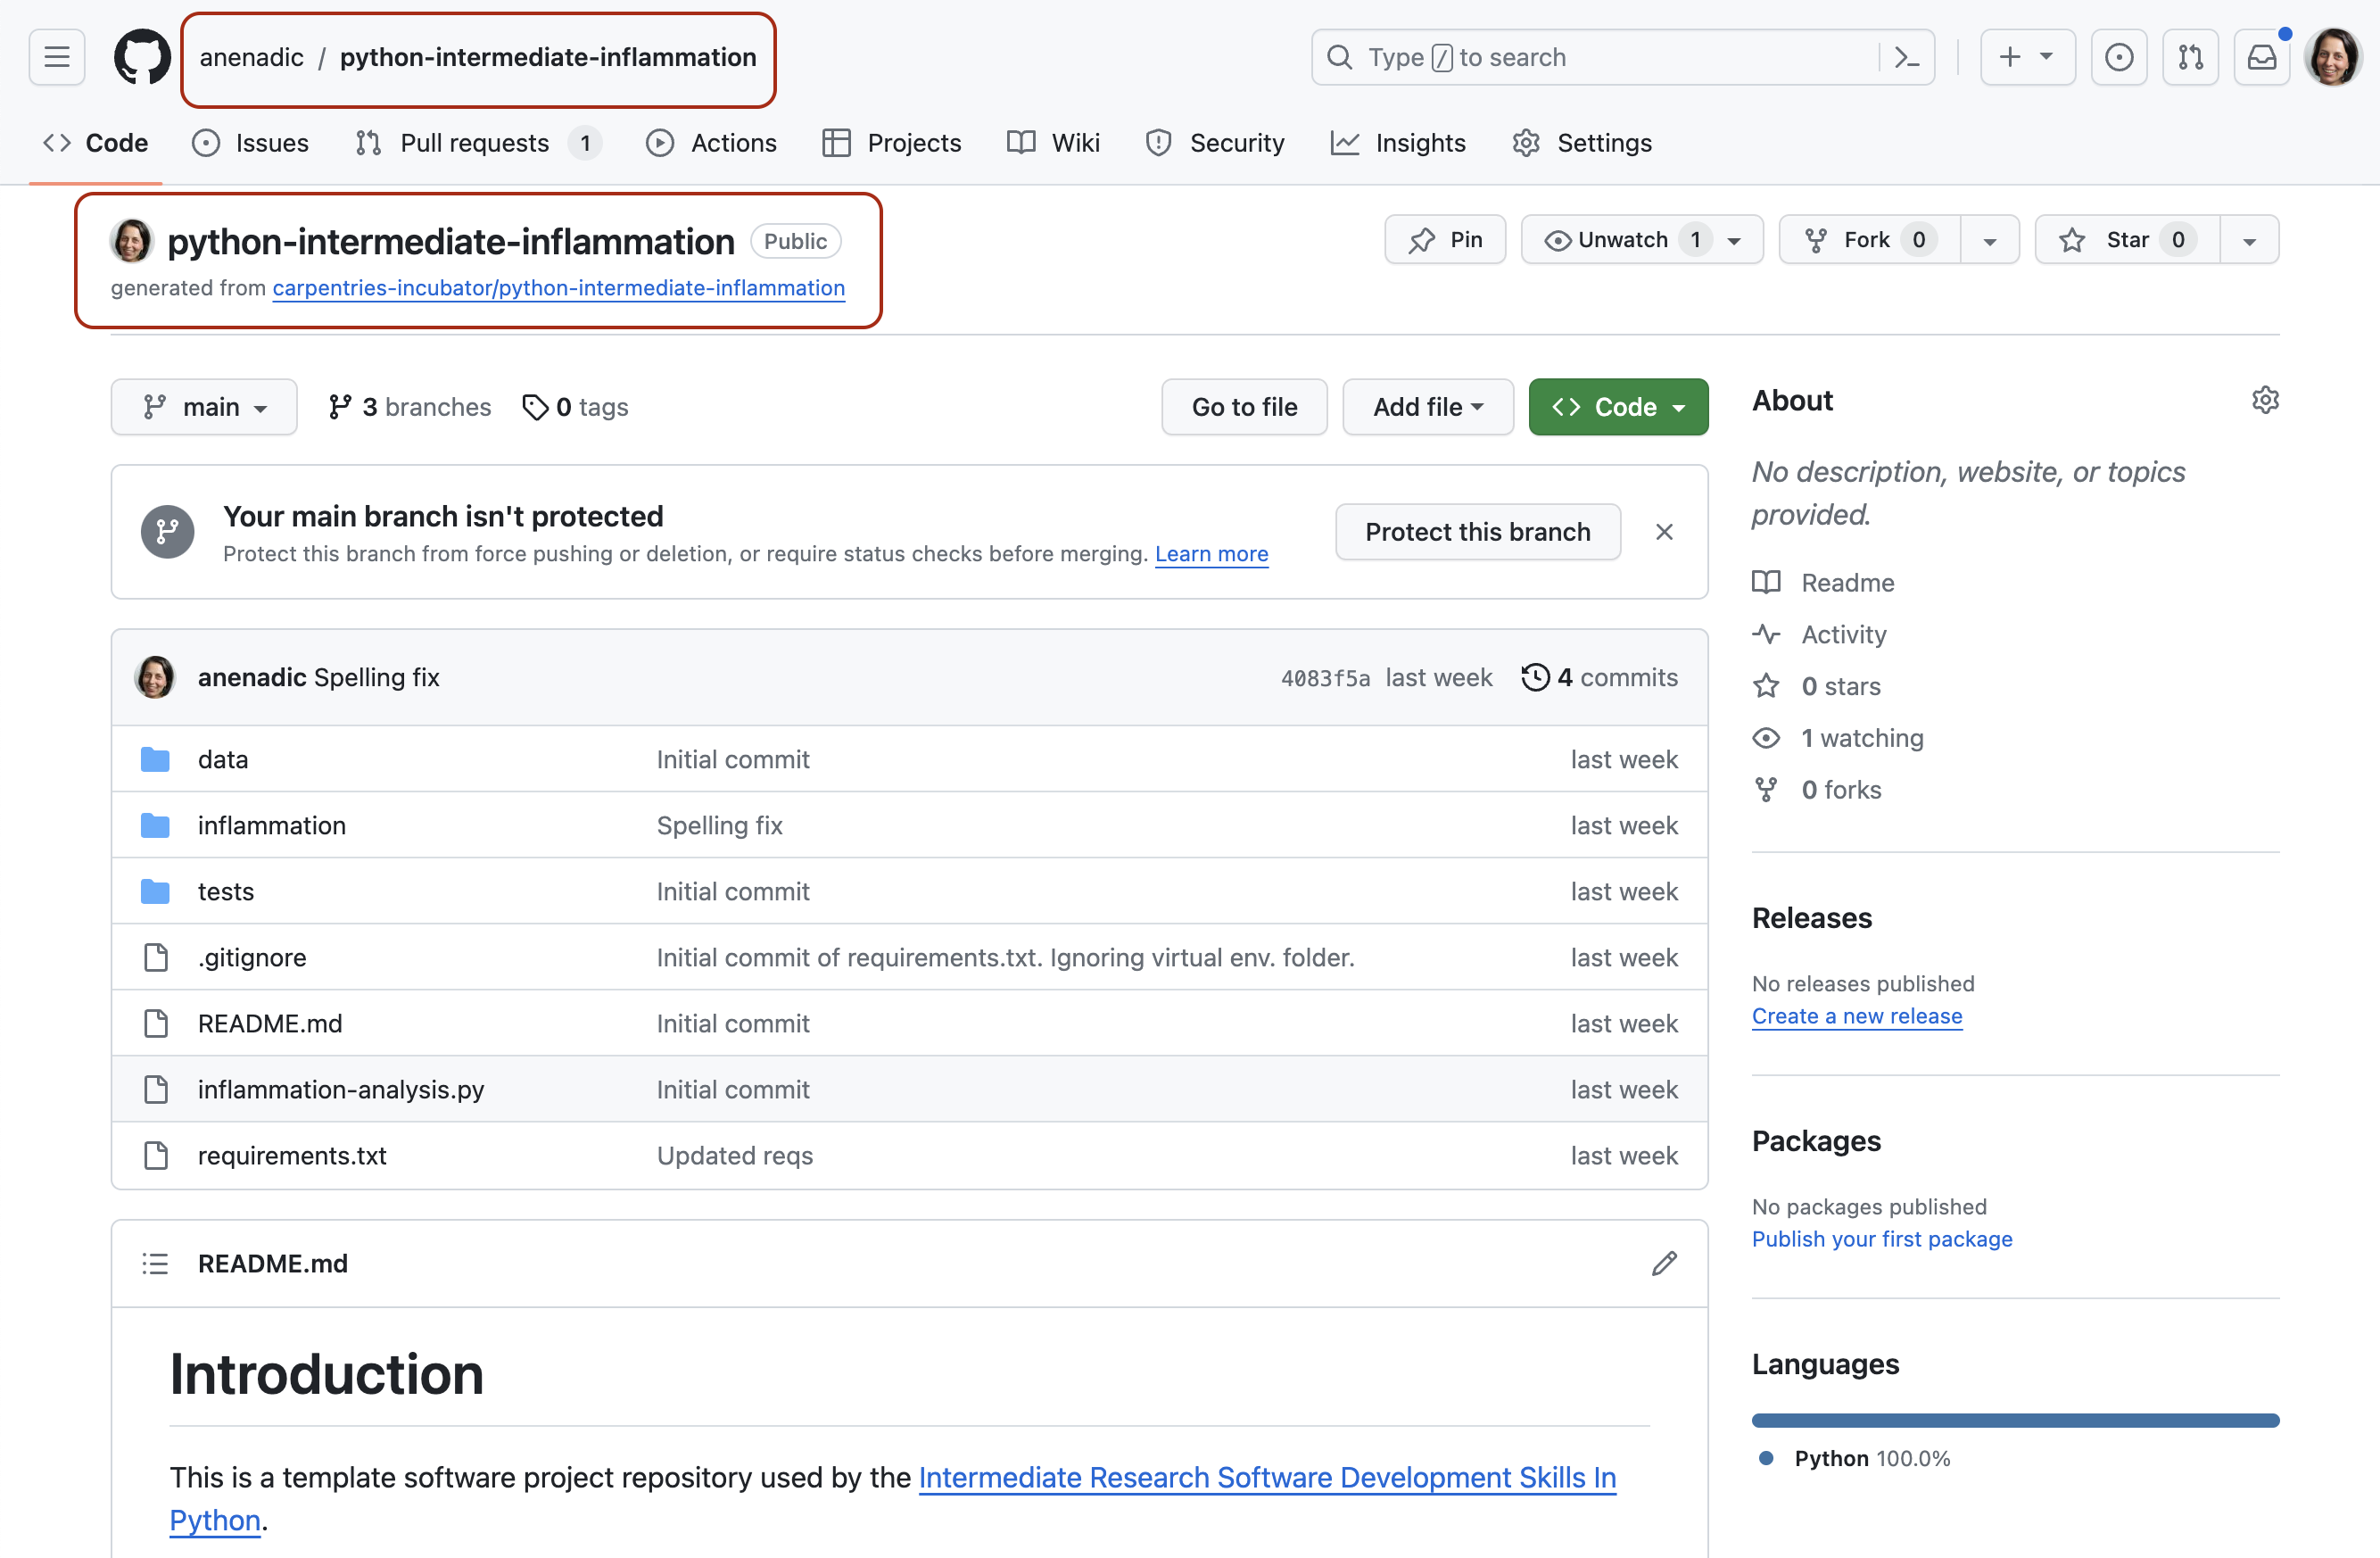 View of your own fork of the software repository in GitHub